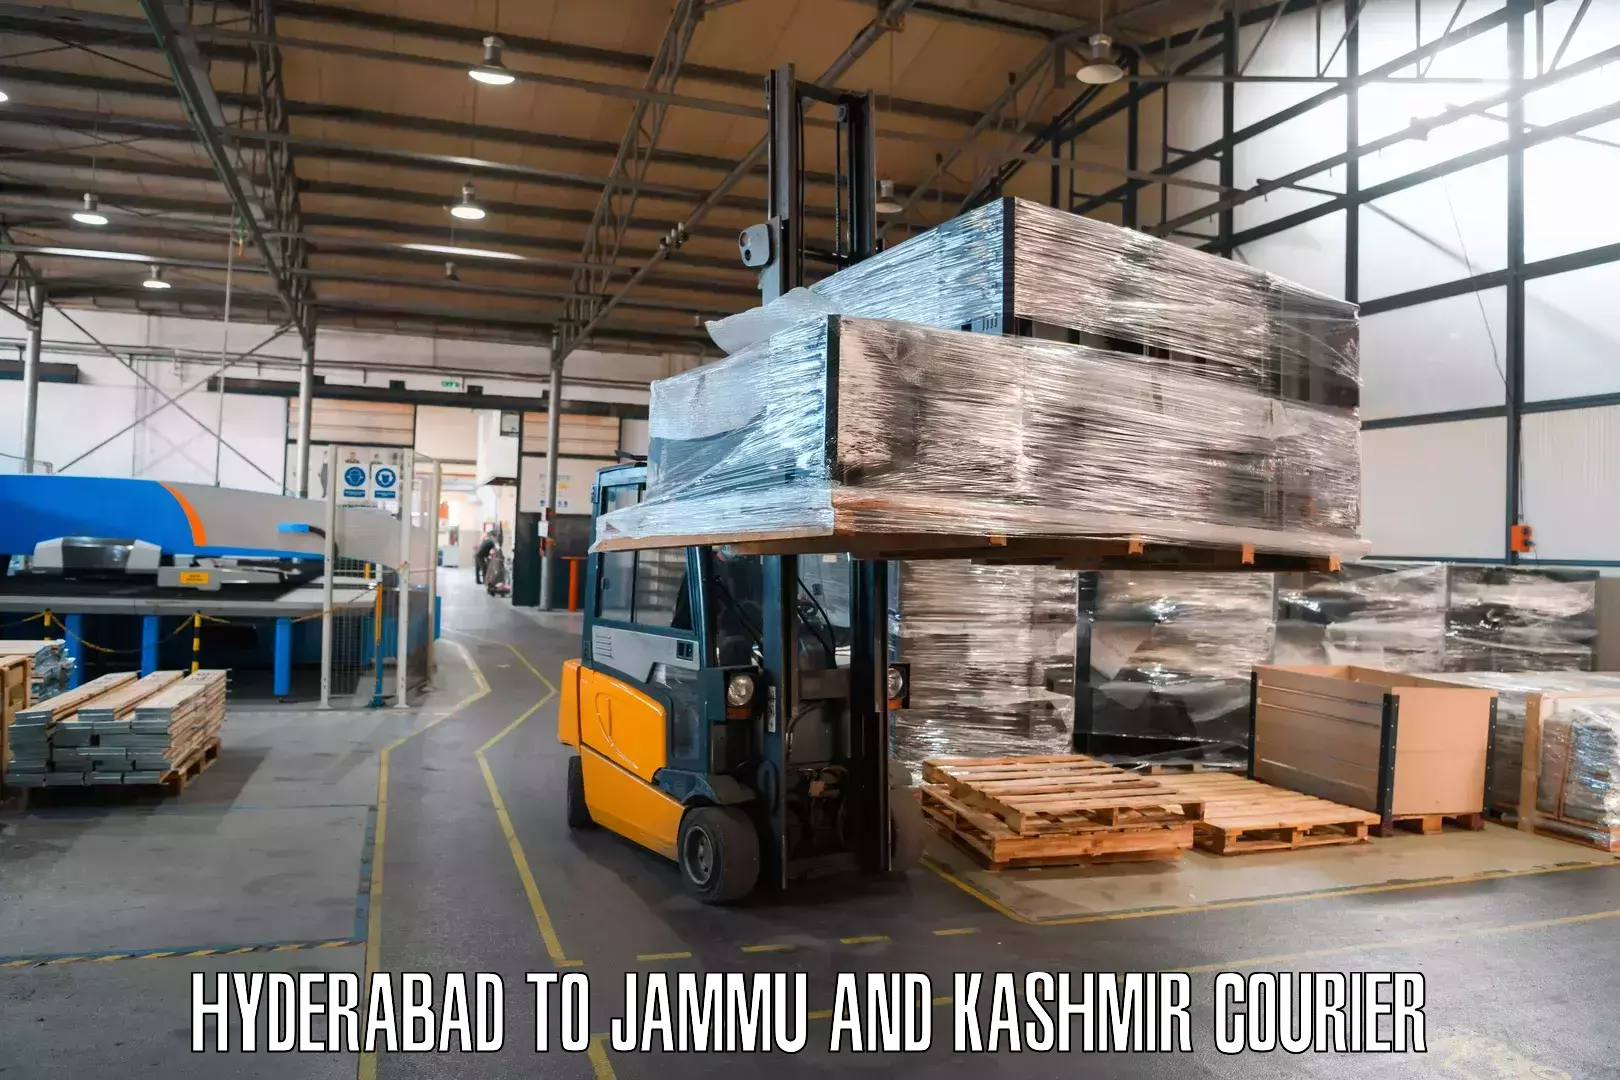 Flexible delivery schedules Hyderabad to Anantnag